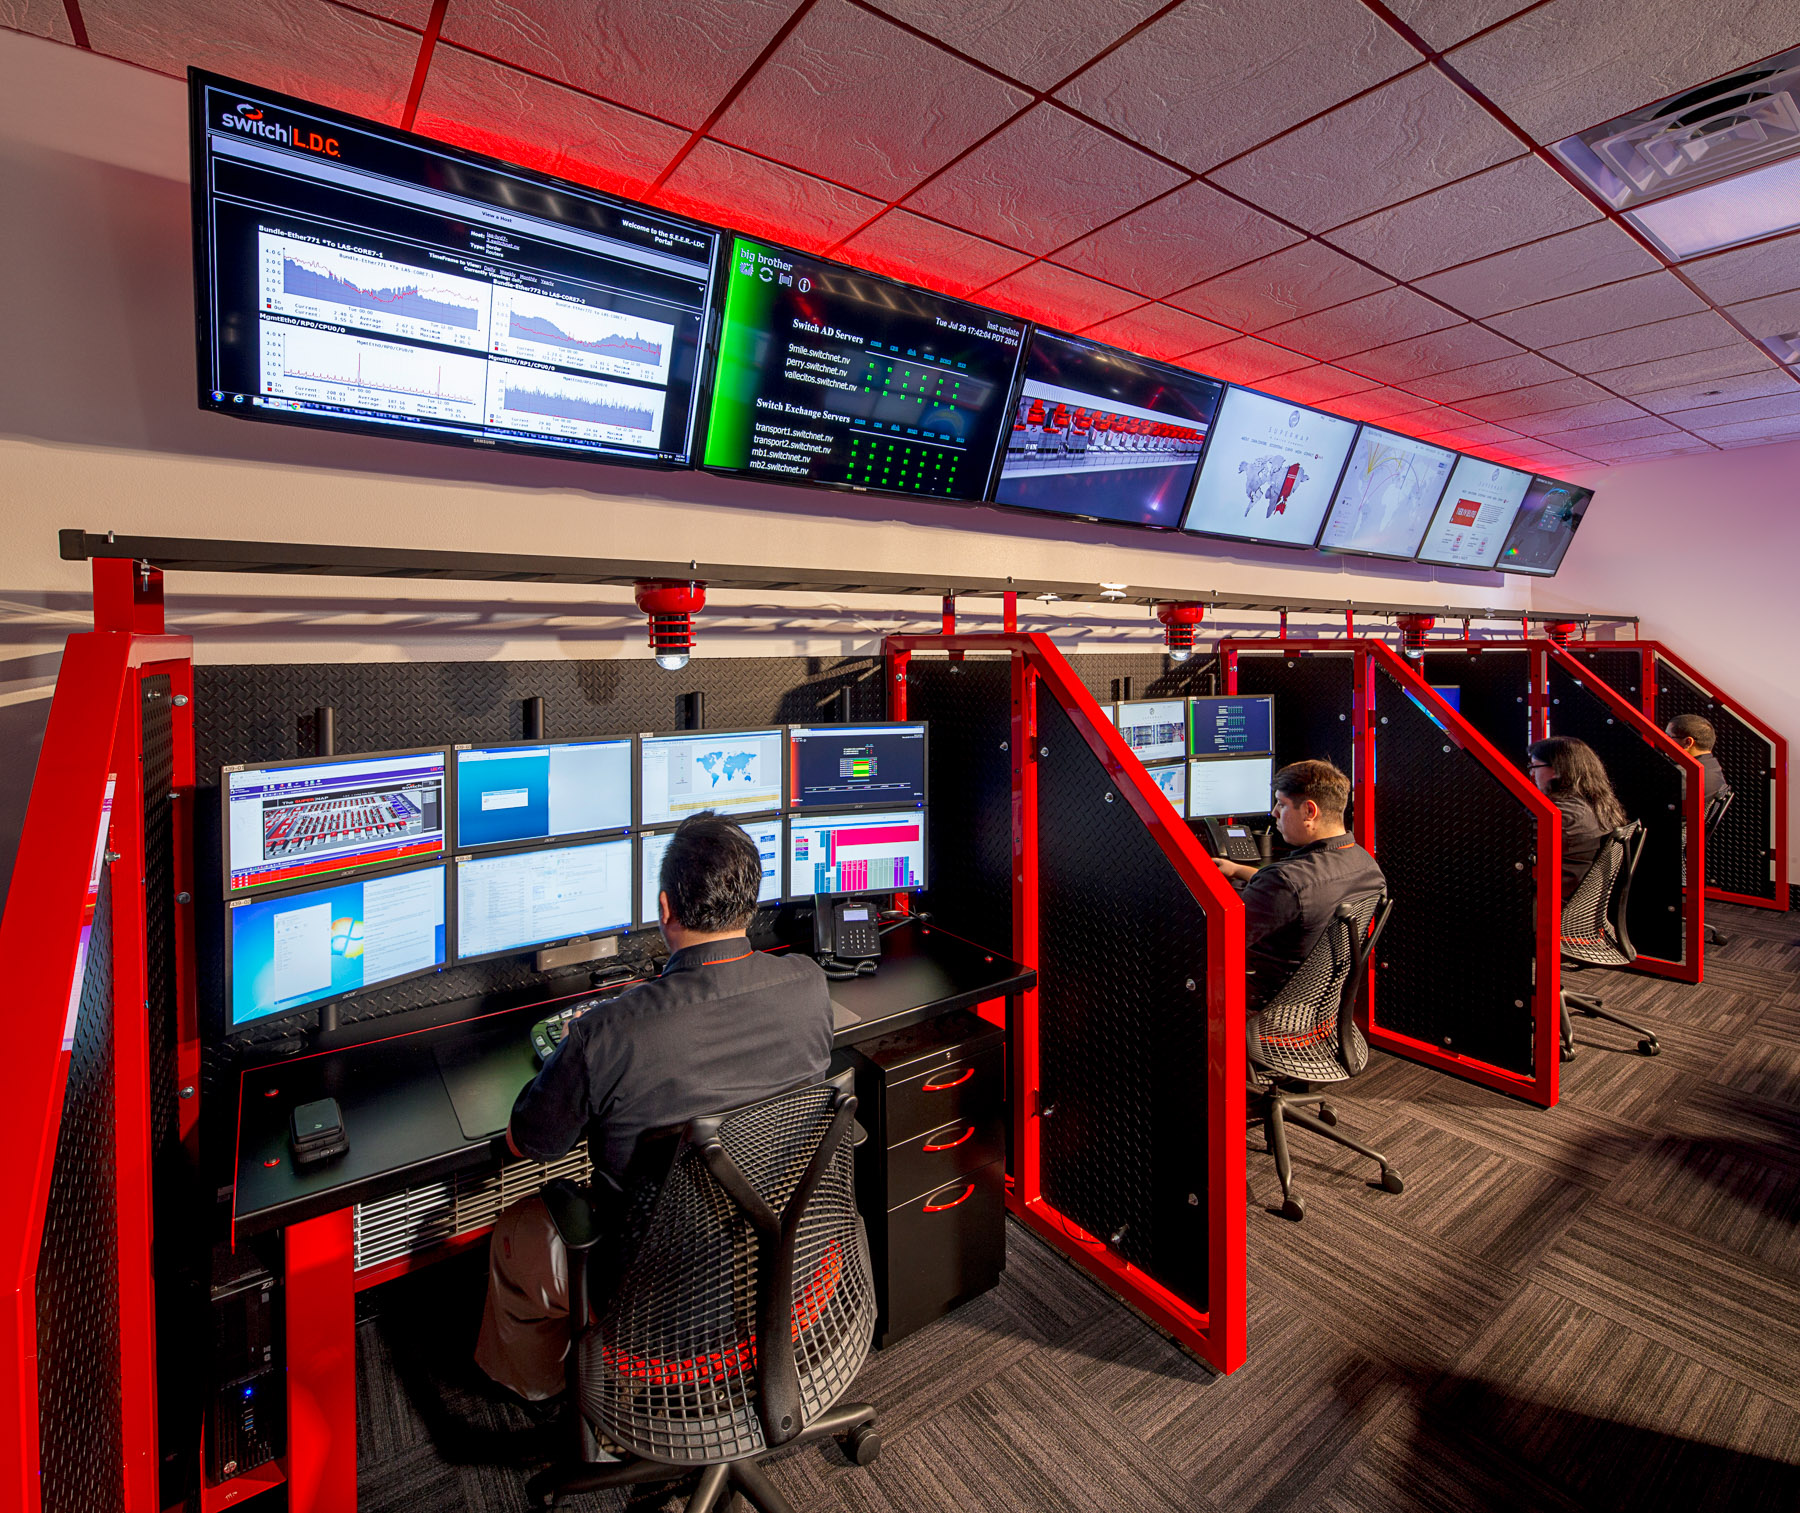 NOC - Network Operations Center